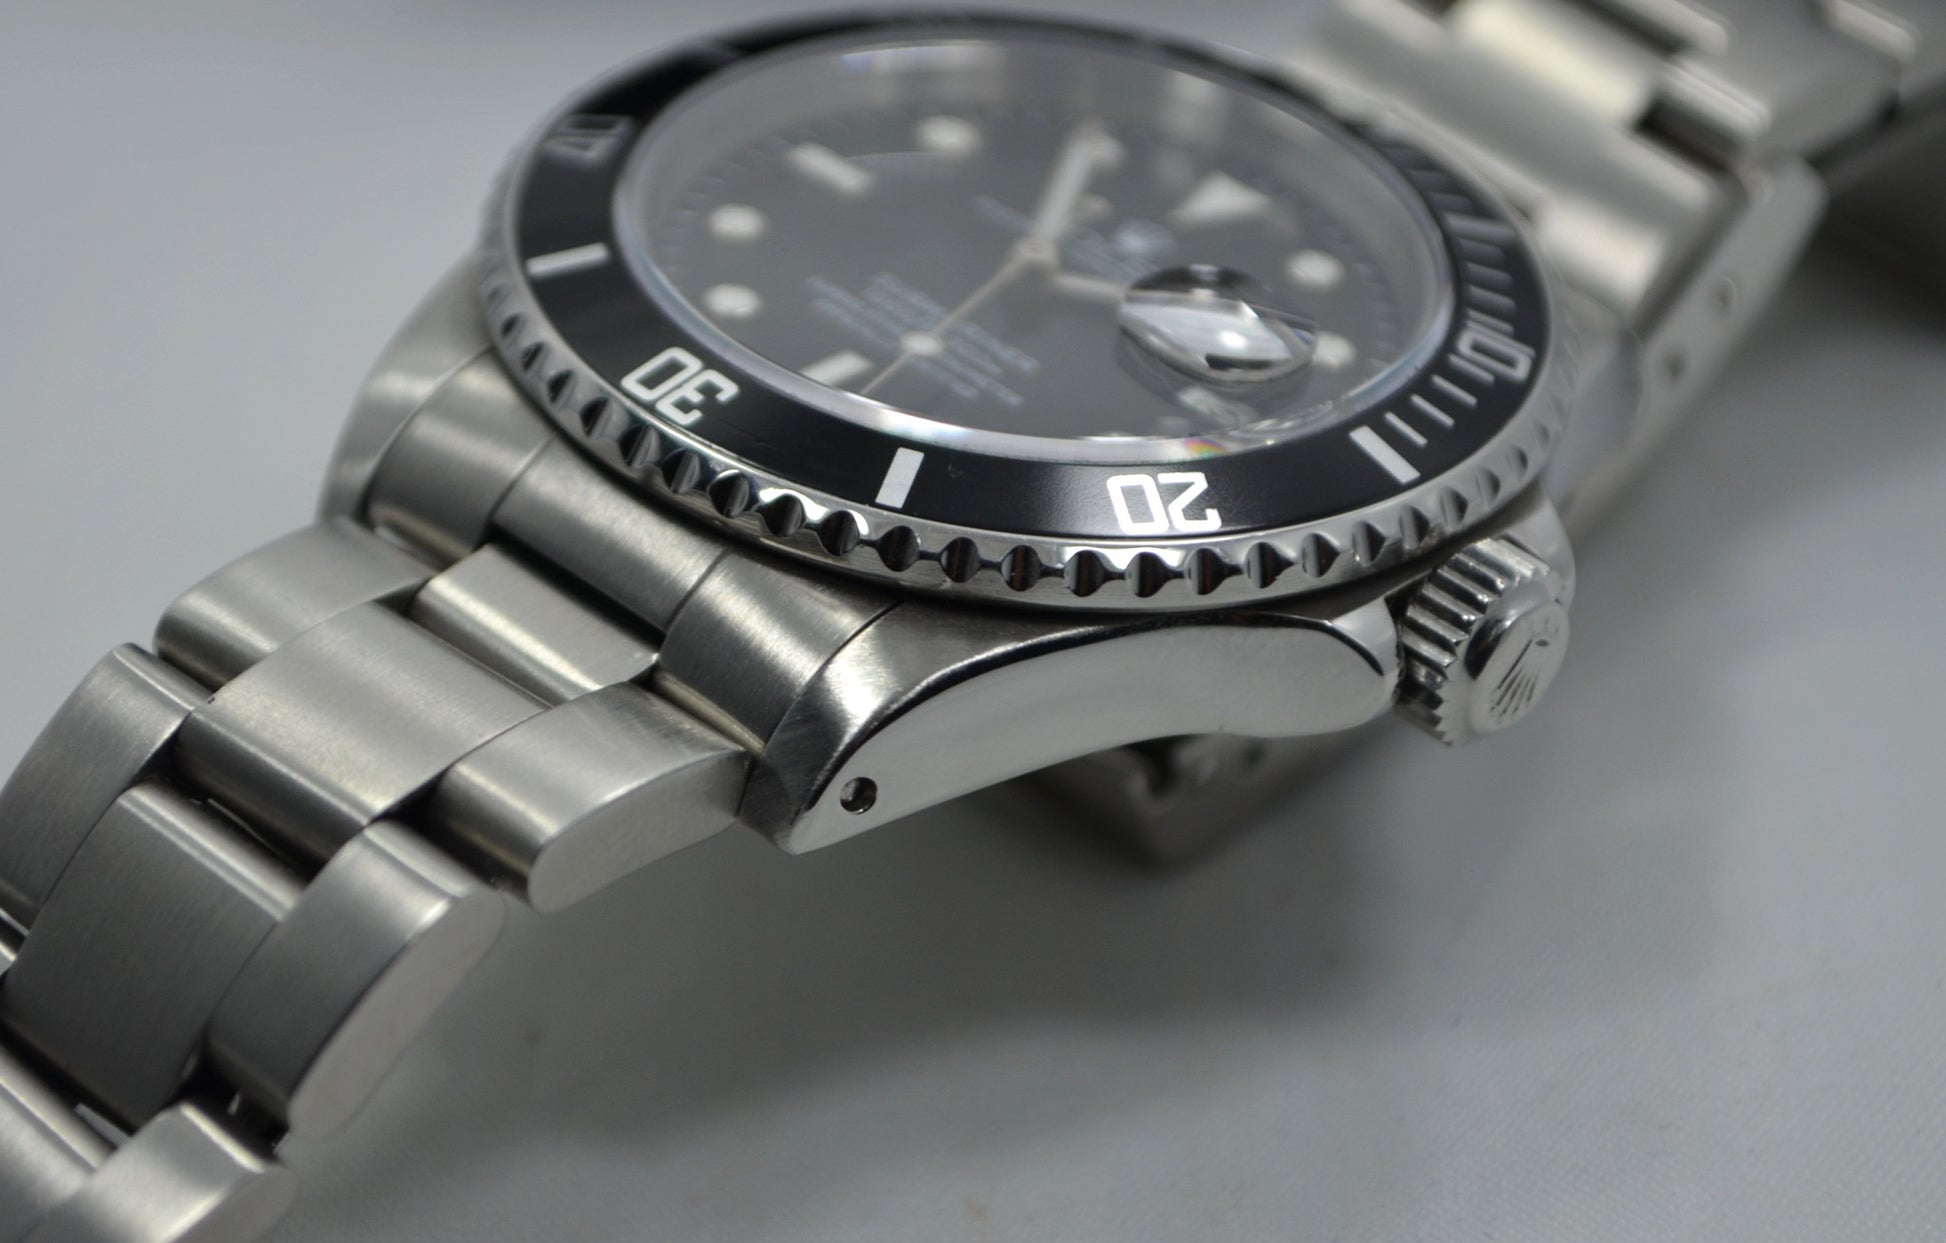 Rolex Submariner 16610 Stainless Steel "L" Serial 1989 Automatic Wristwatch - Hashtag Watch Company